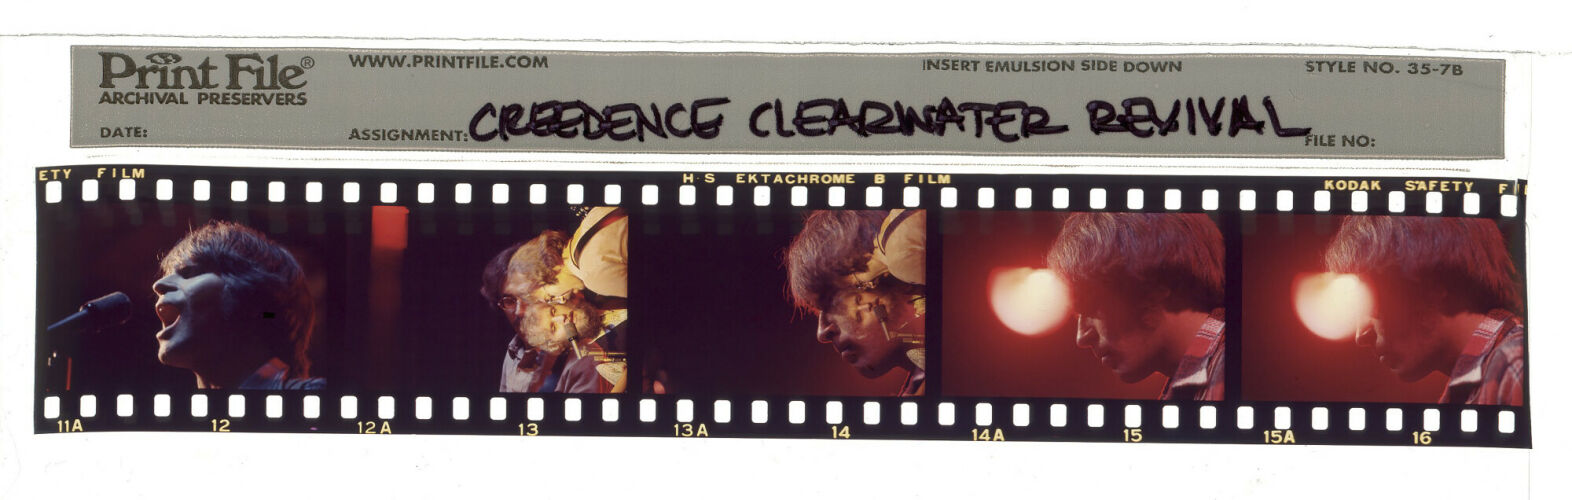 EC_CREEDENCE_022: Creedence Clearwater Revival